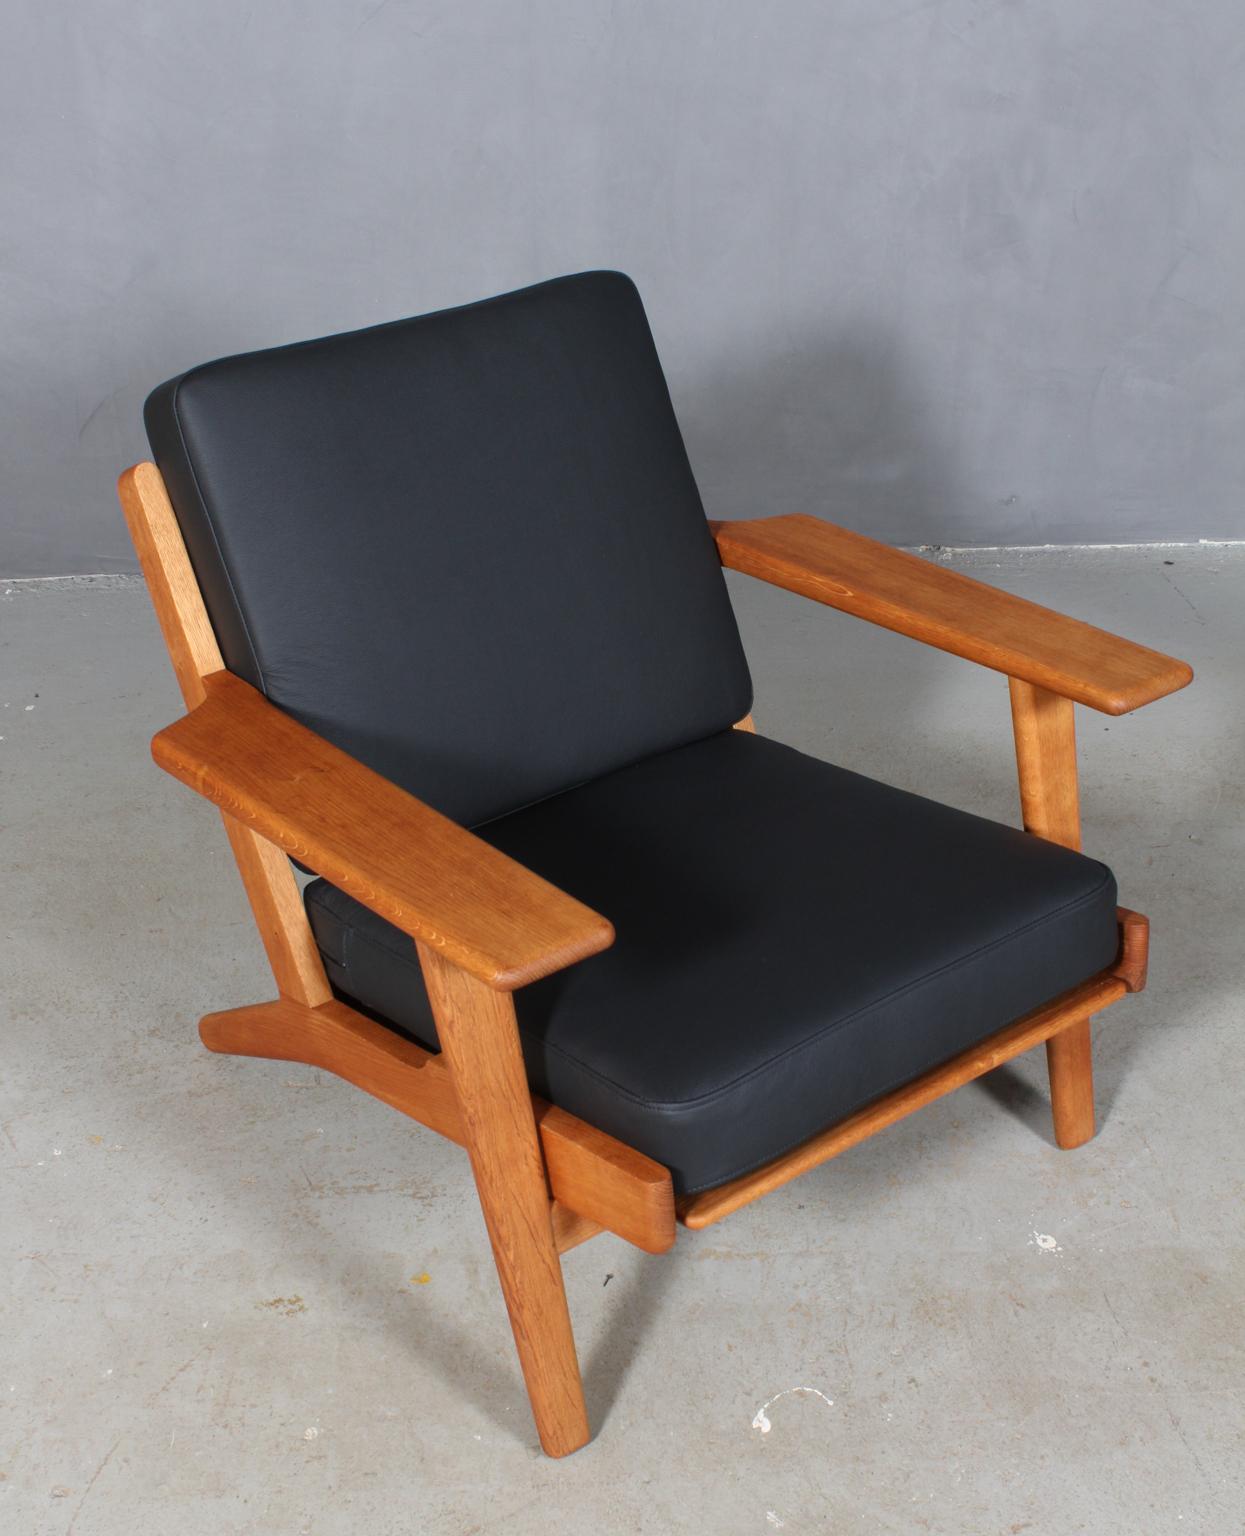 Hans J. Wegner lounge chair made of solid oak.

New upholstered with black buffalo leather. Original Epeda cushions.

Model 290, made by GETAMA.